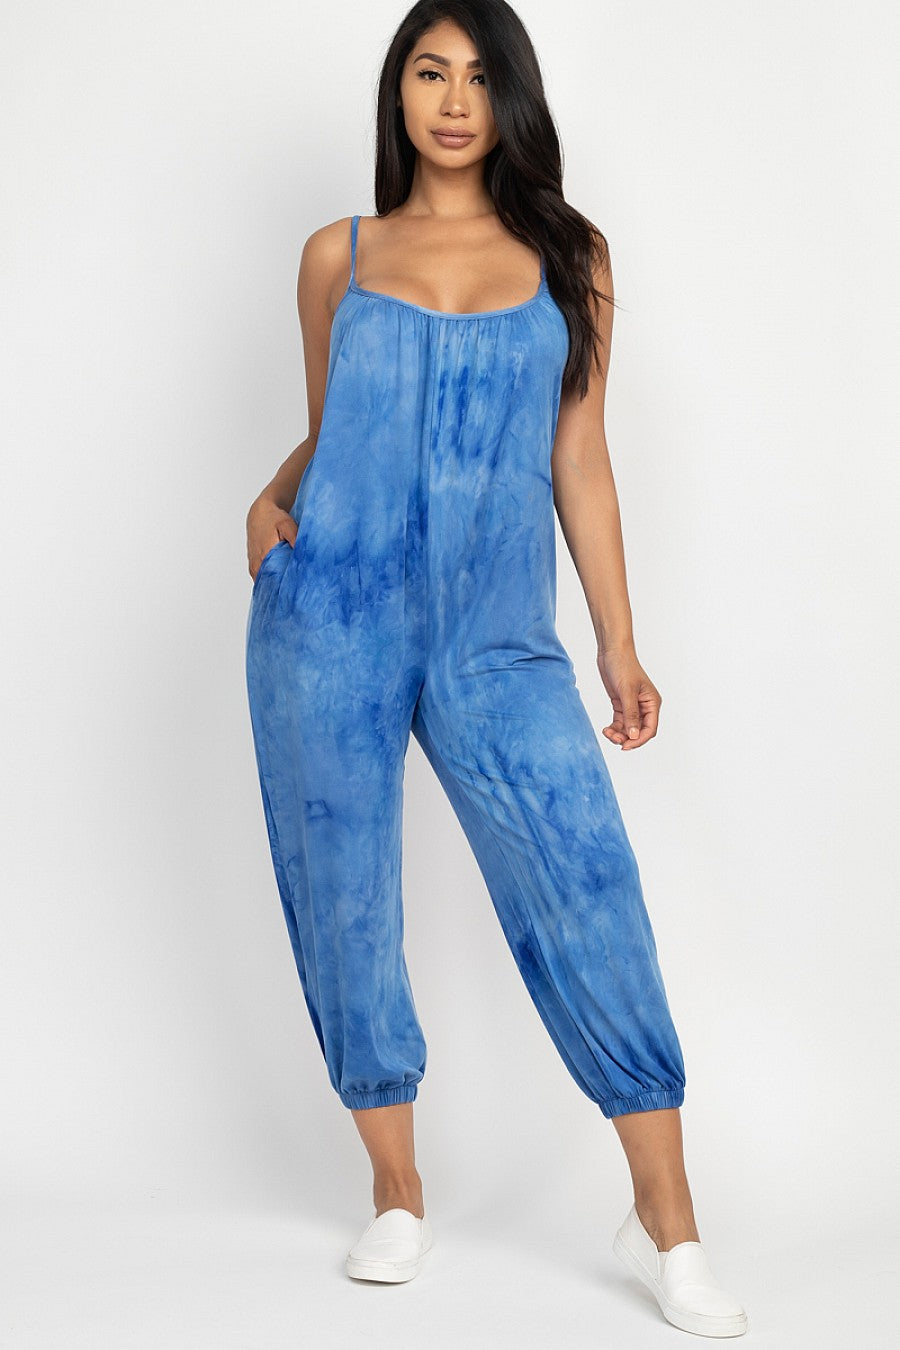 Cute And Comfy Tie Dye Jumpsuit